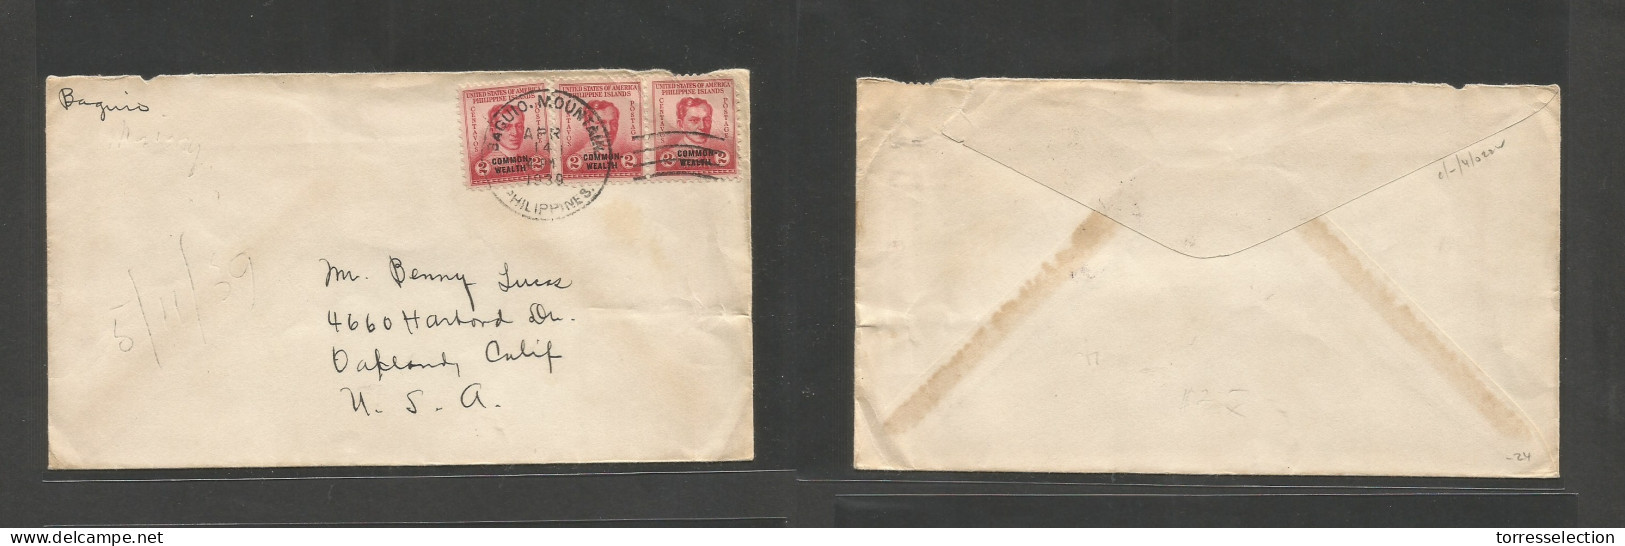 PHILIPPINES. 1939 (14 Apr) Baguio Mountains - USA, Oakland. Multifkd Env At 6c Rate, Rolling Cds. VF Origin. - Filipinas